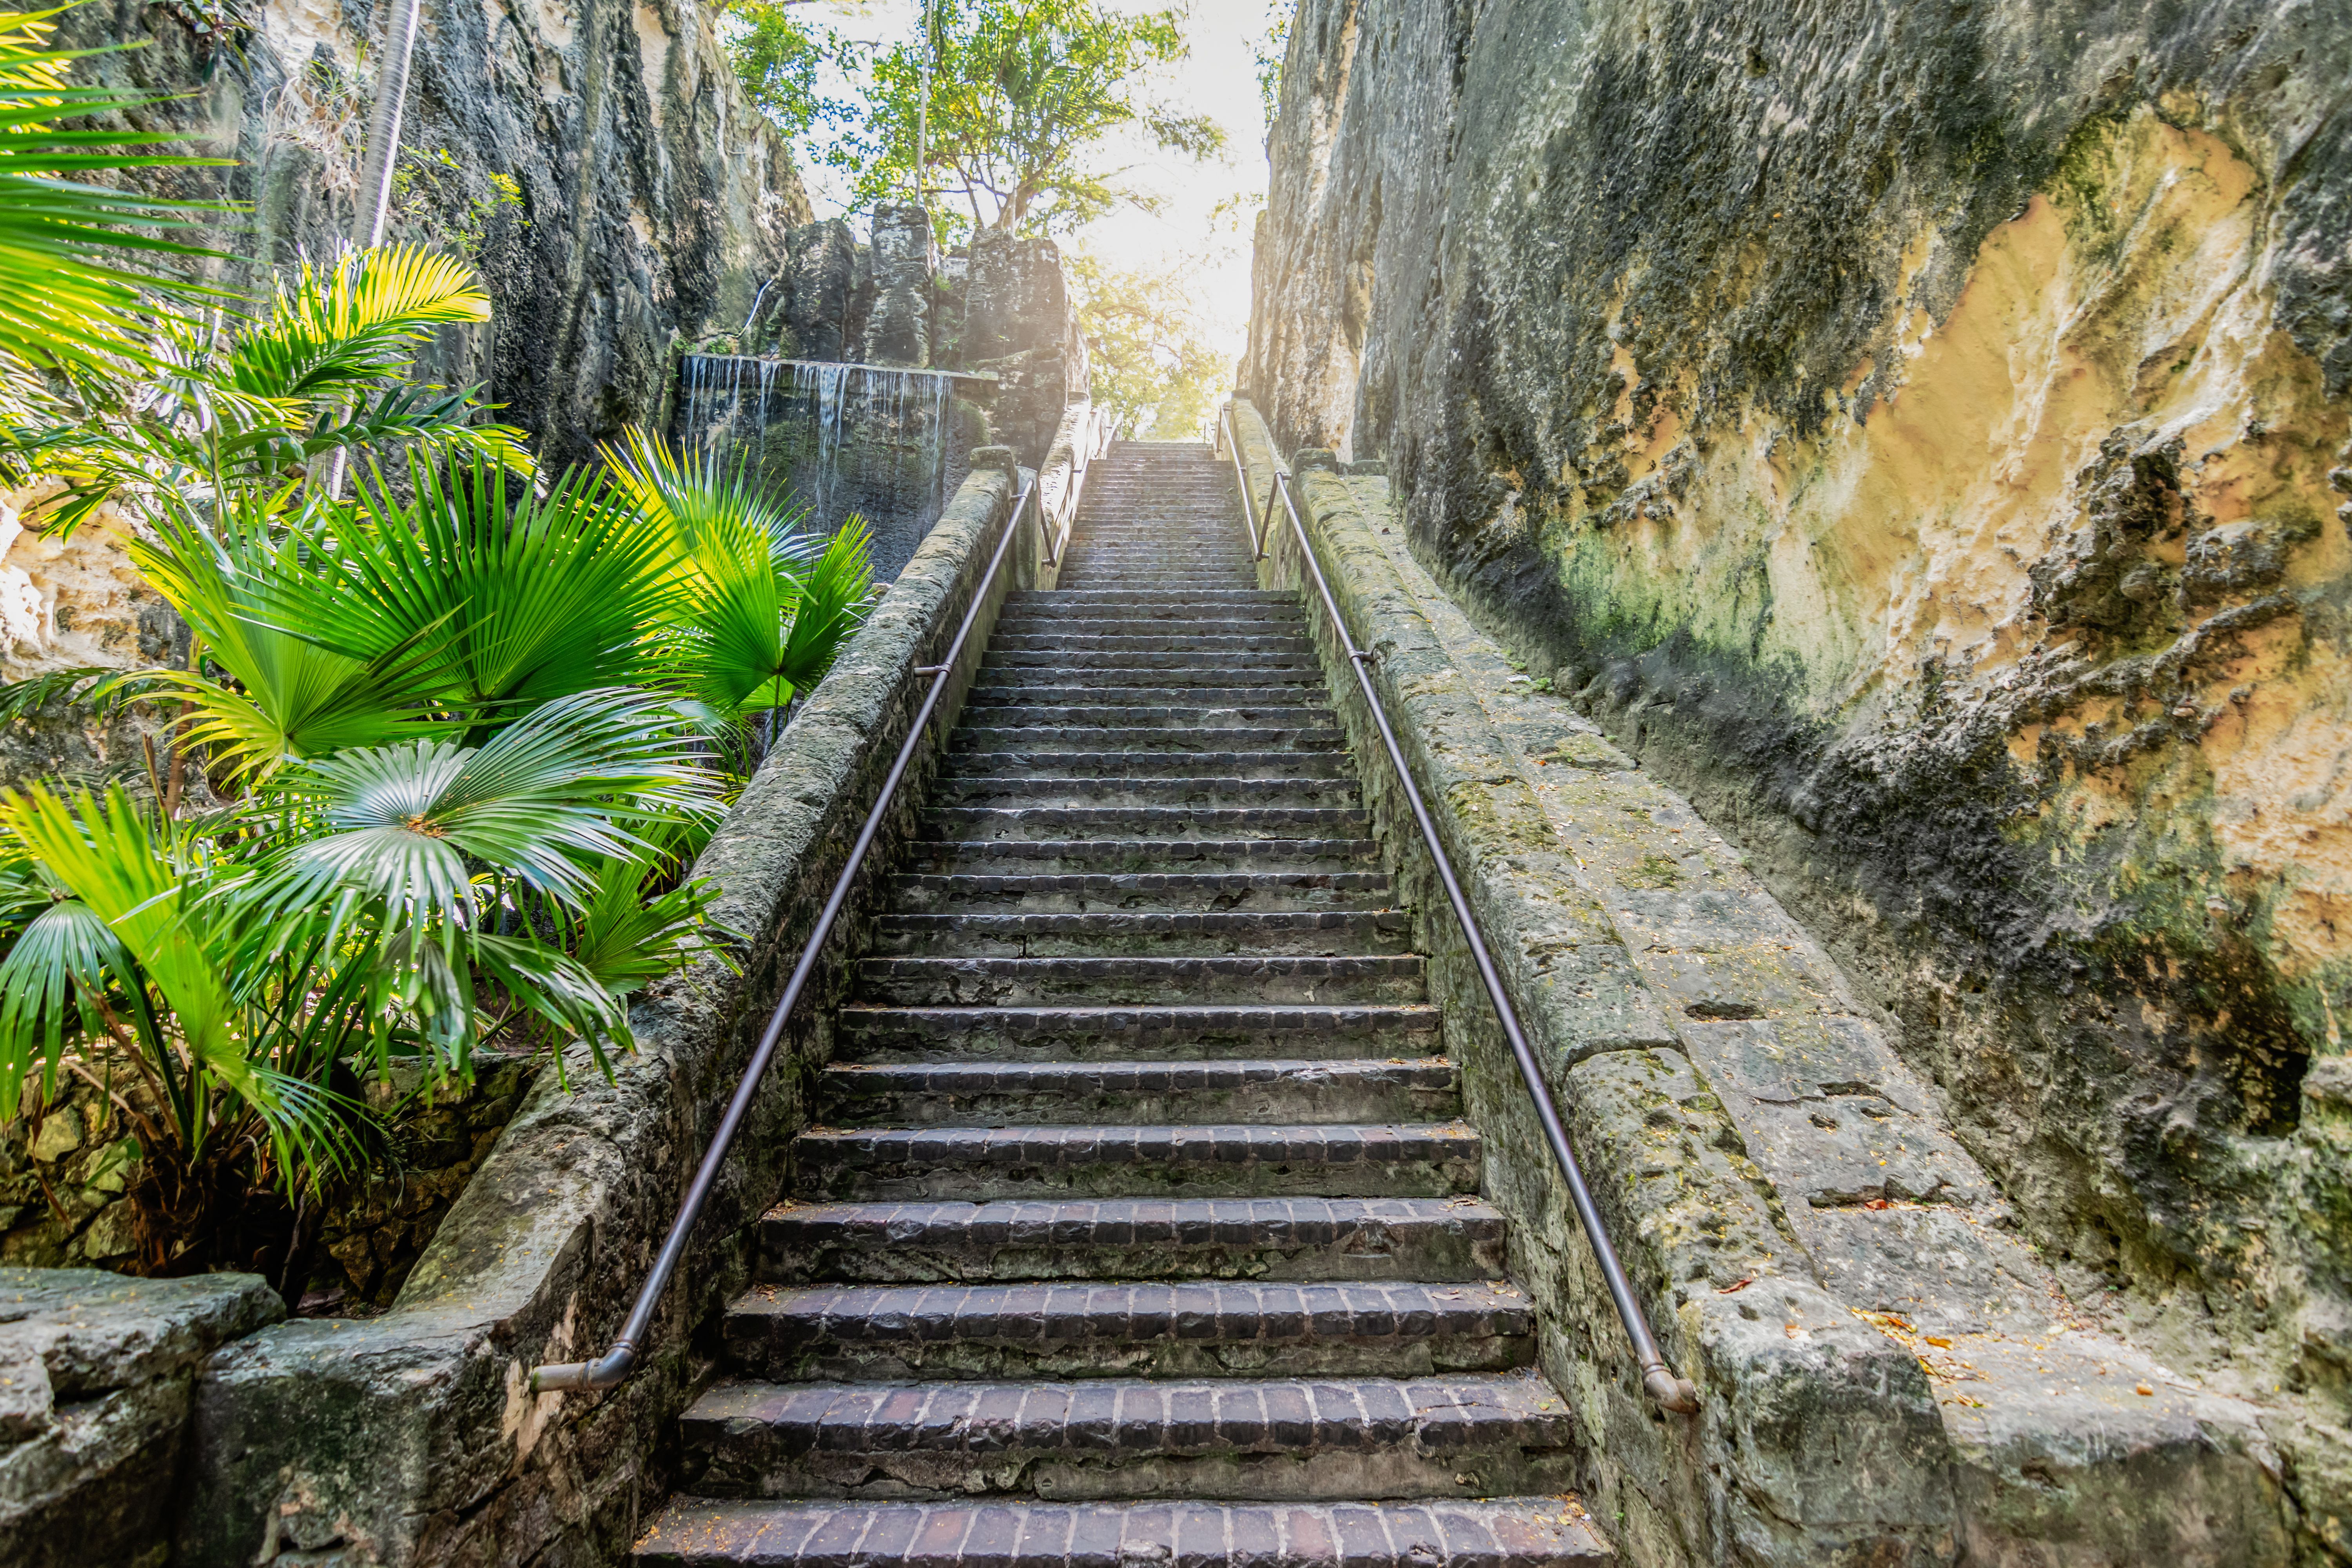 The Queen's Staircase in Nassau, Bahamas, surrounded by jungle foliage